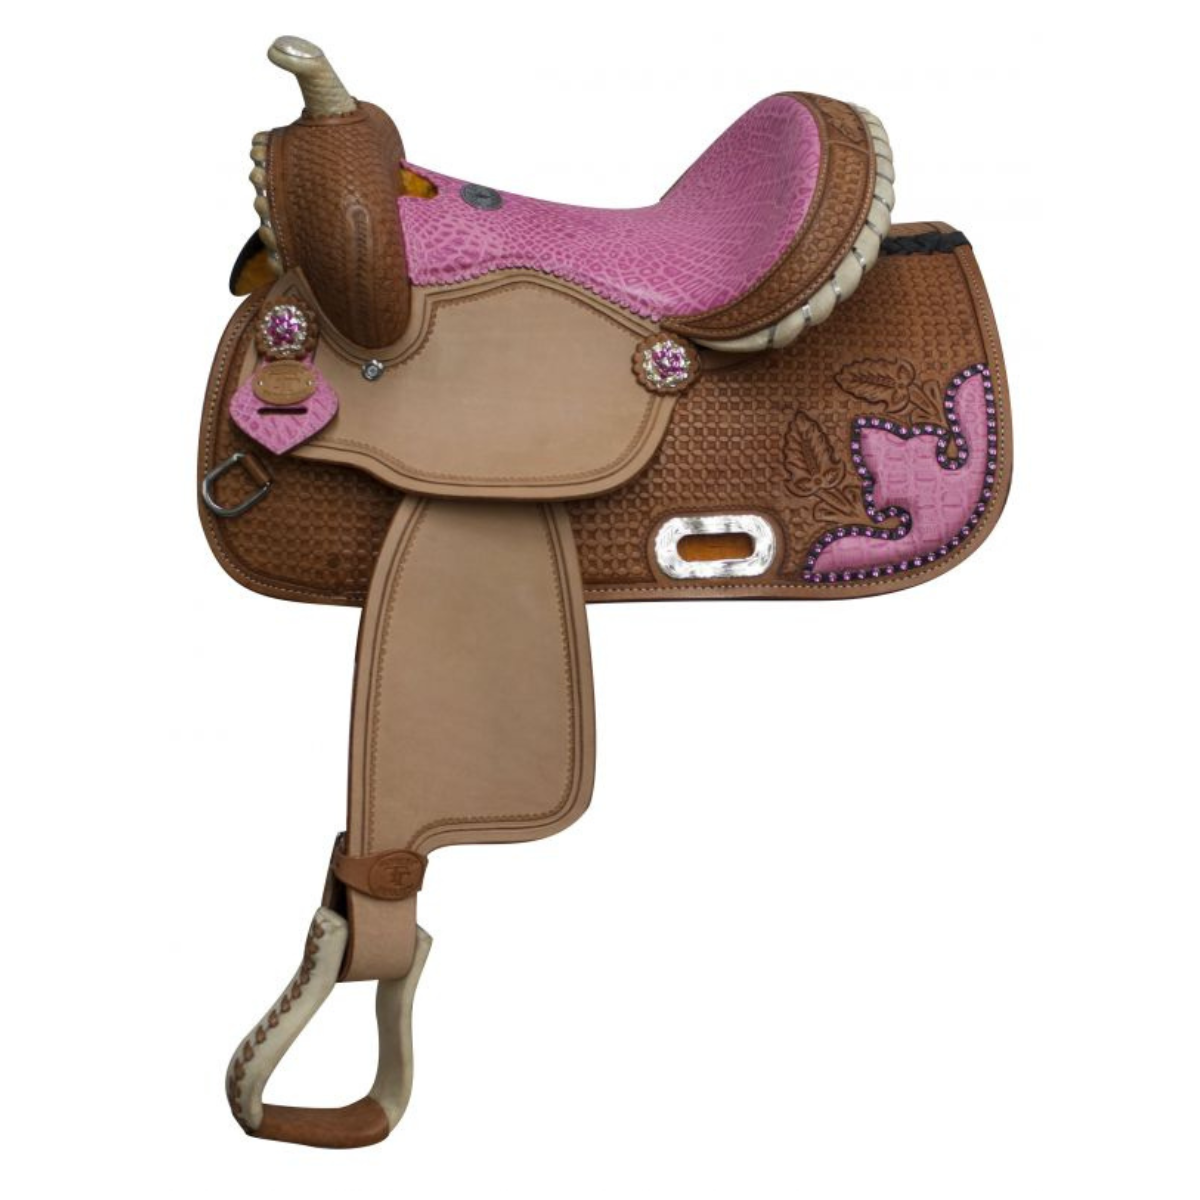 13" DOUBLE T  BARREL STYLE SADDLE WITH ALLIGATOR PRINT SEAT AND ACCENTS - Double T Saddles